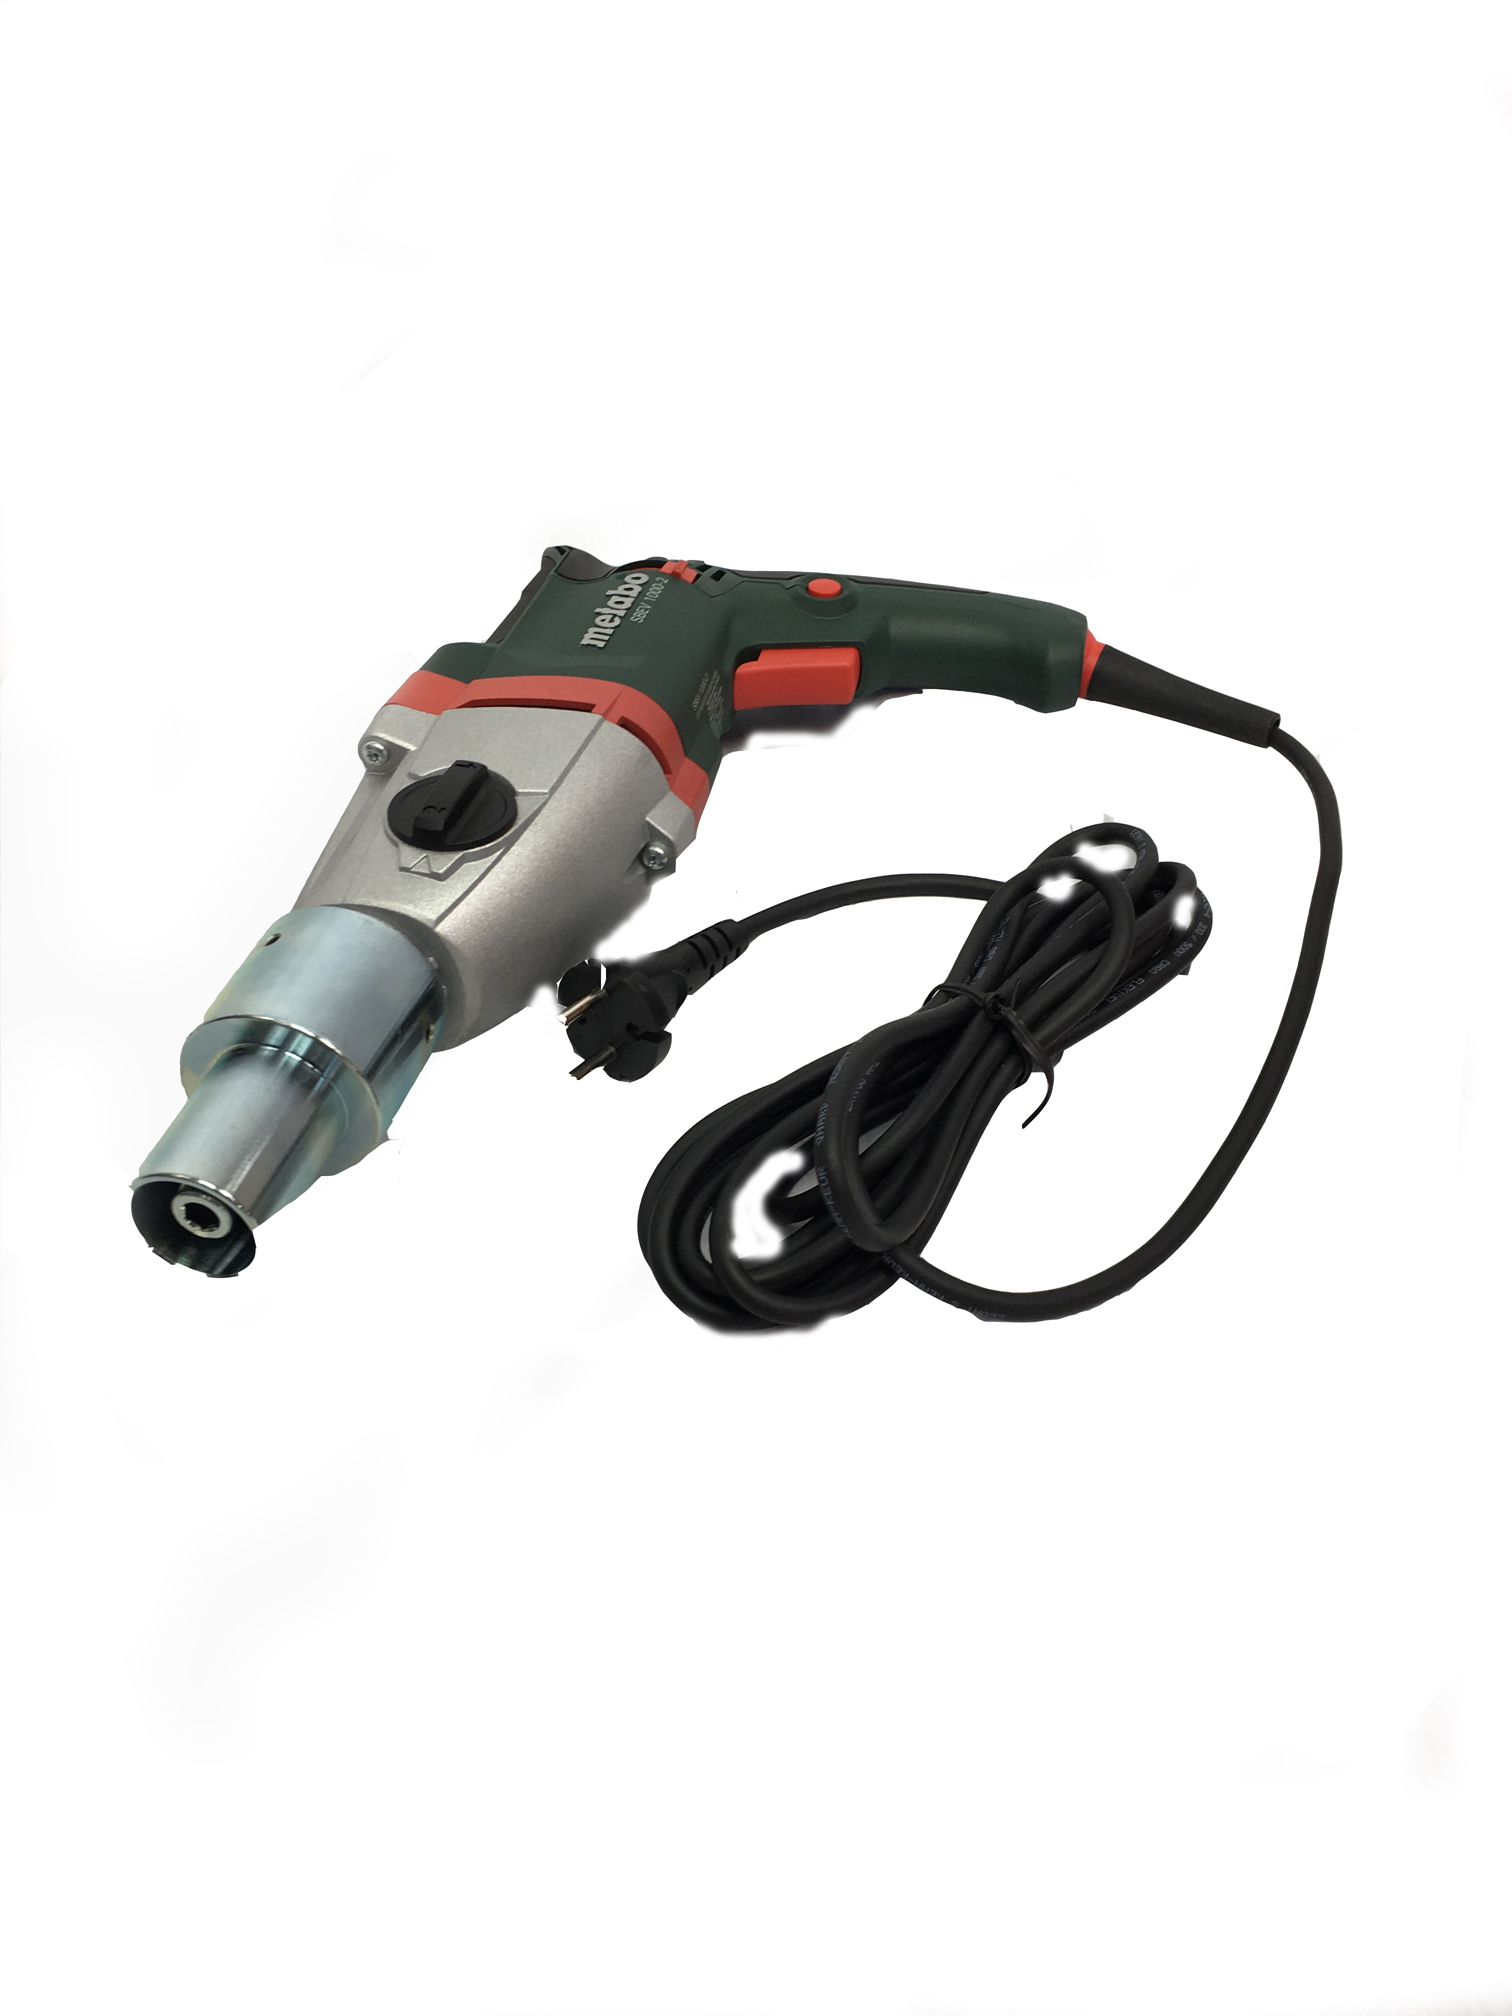 PD4 duct cleaning powerdrill